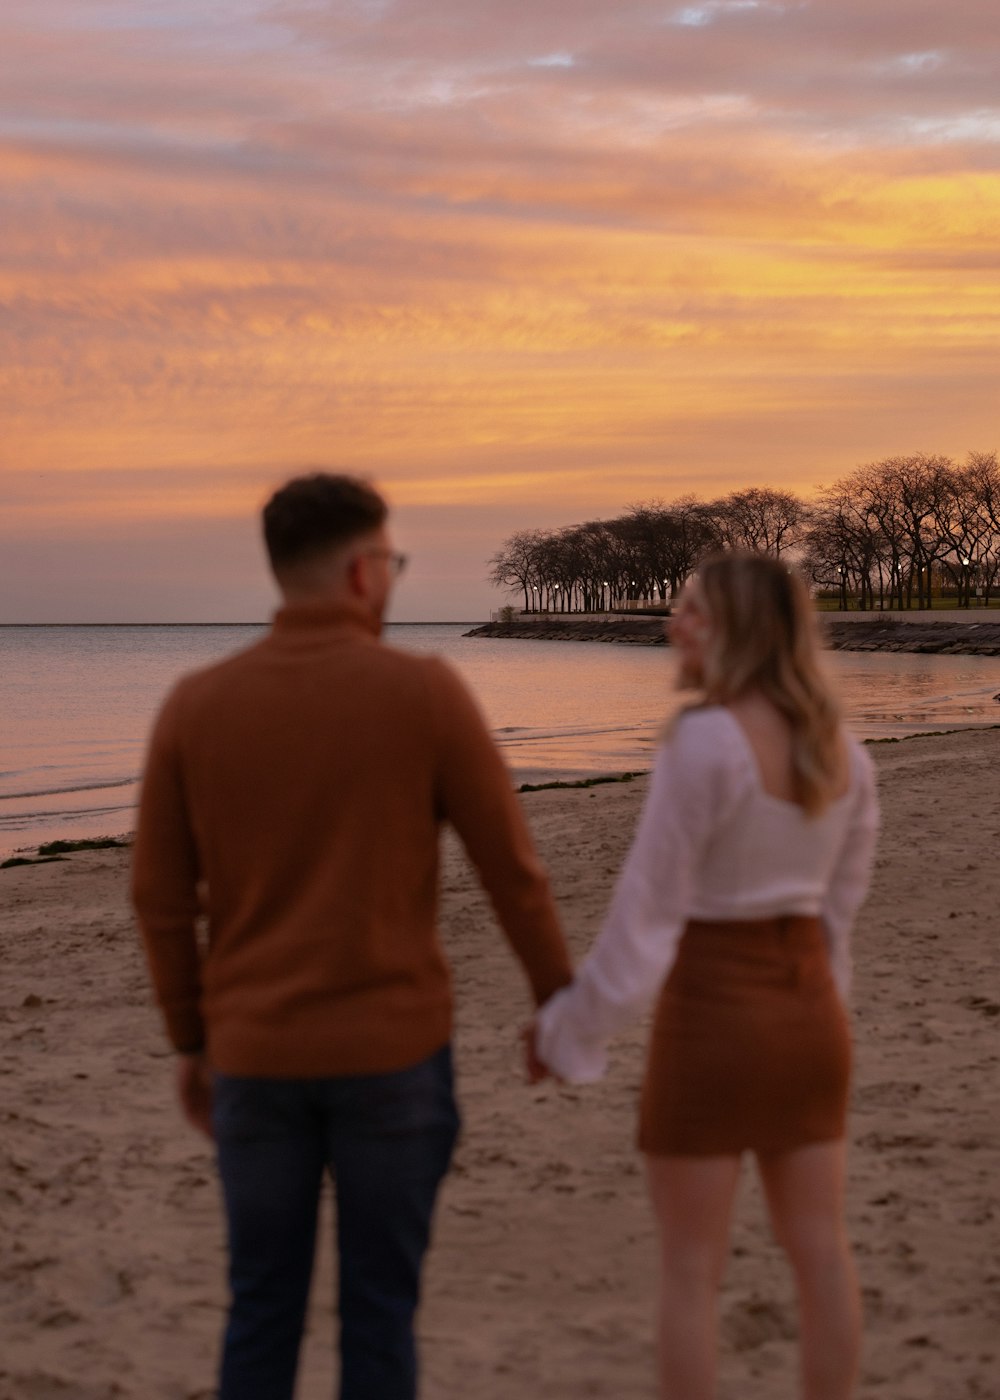 a man and woman standing on a beach at sunset